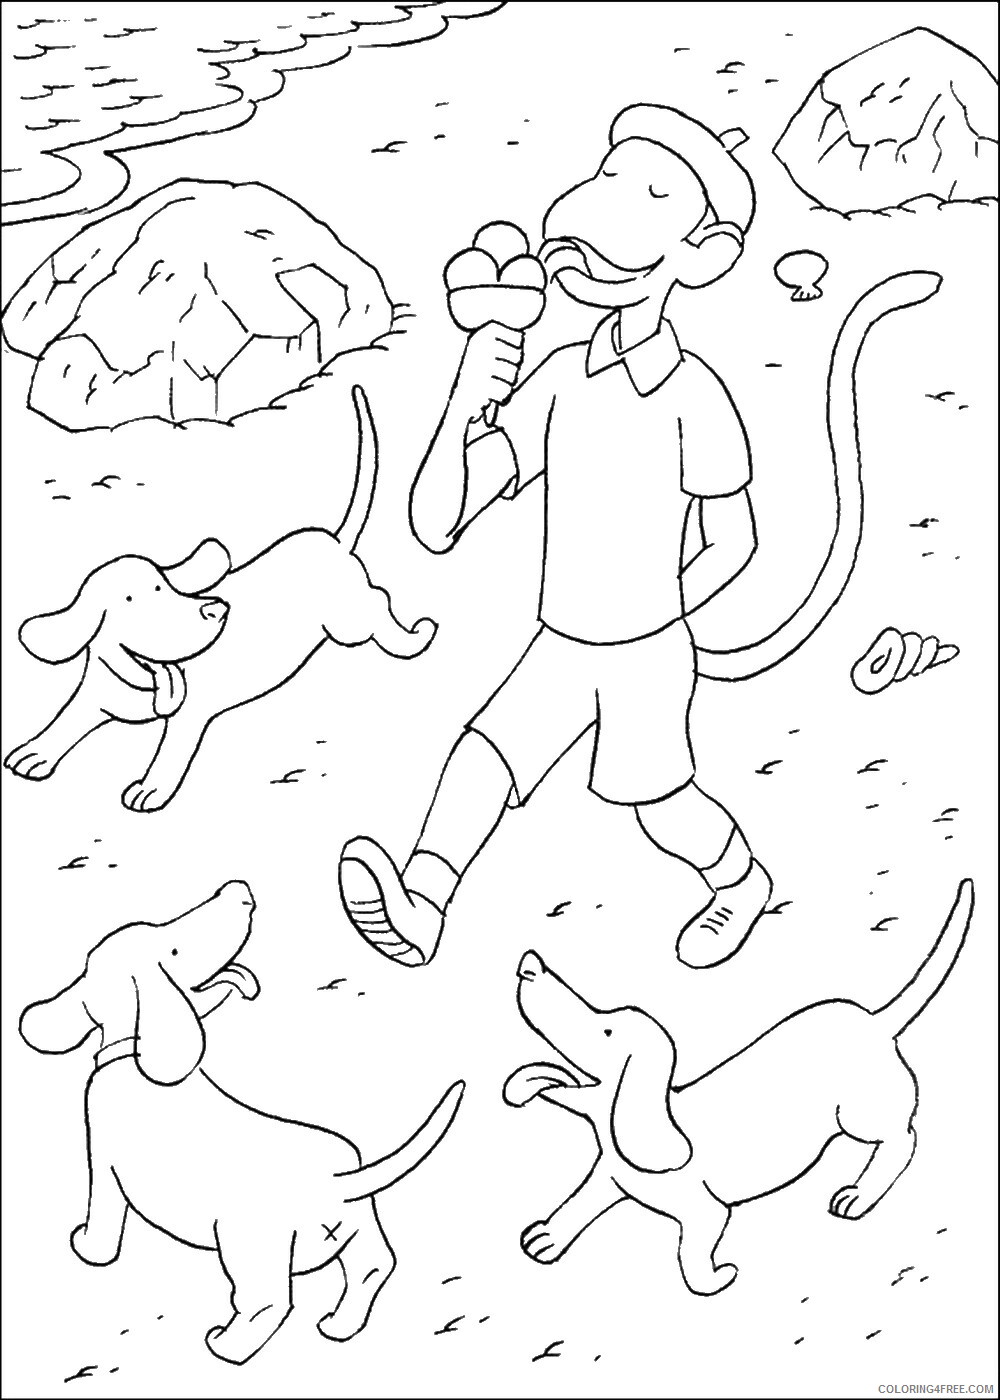 Babar Coloring Pages TV Film babar_cl_19 Printable 2020 00371 Coloring4free